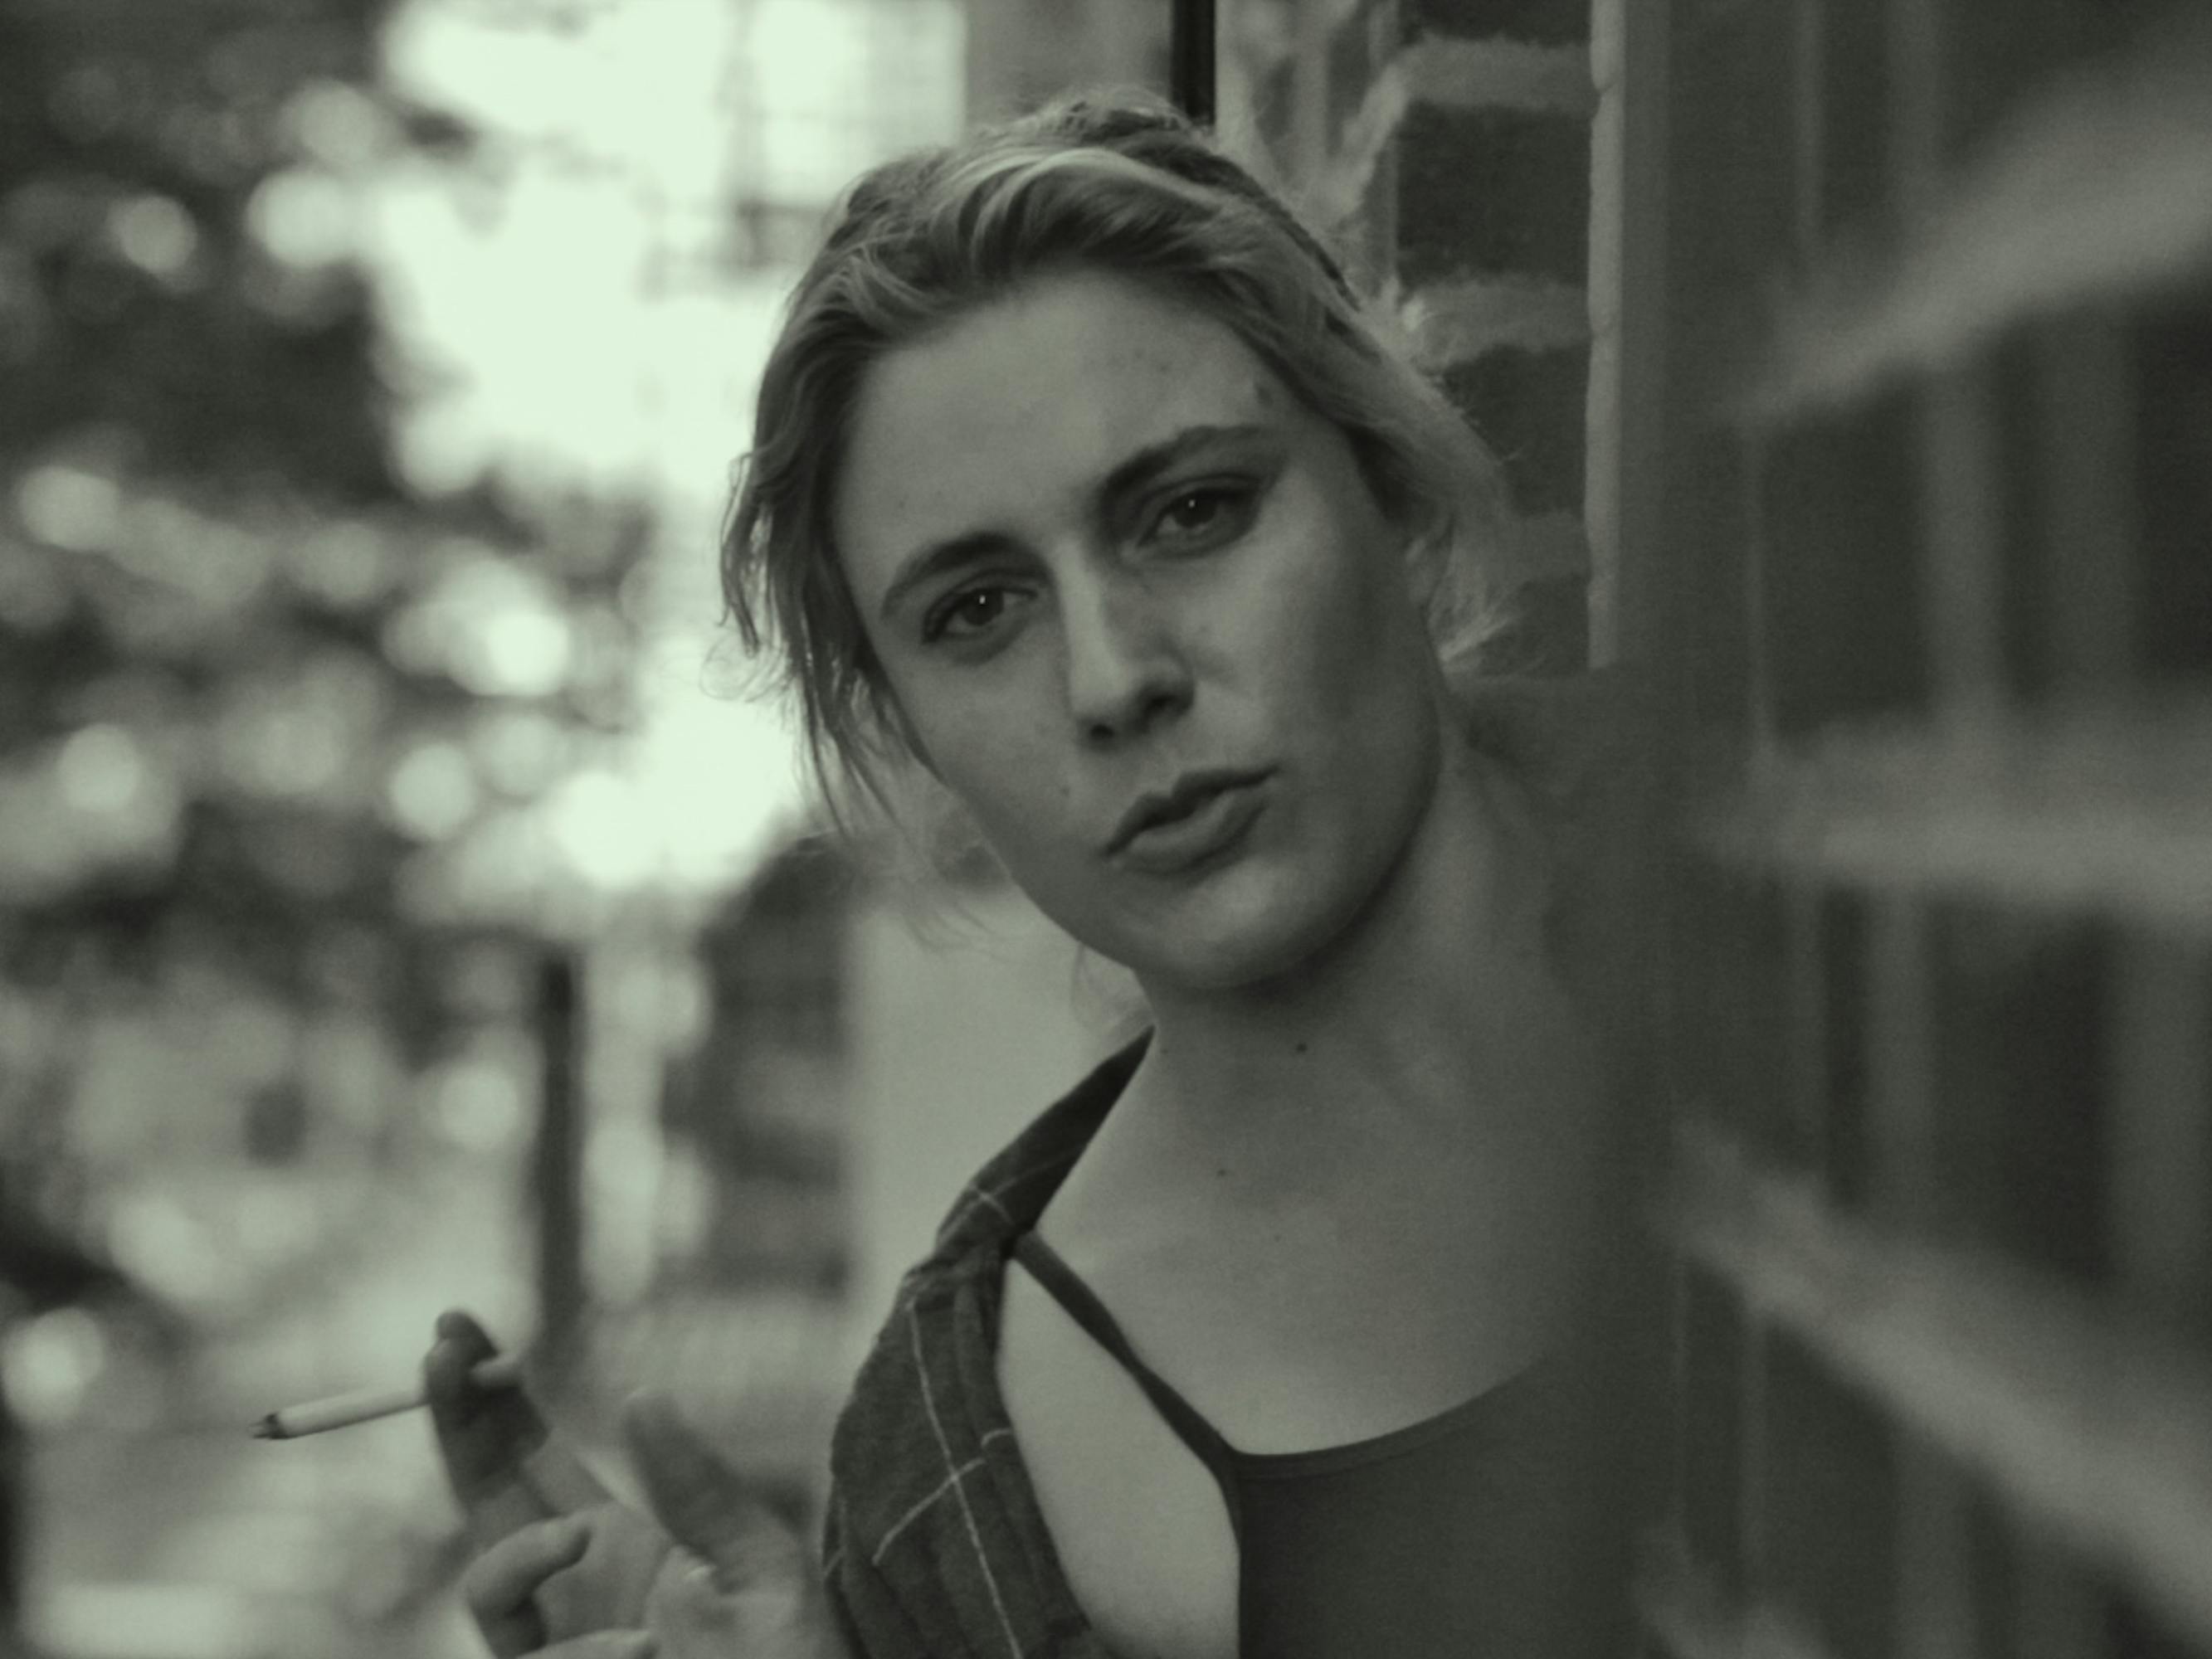 Frances (Greta Gerwig) looks from behind a wall directly at the camera.